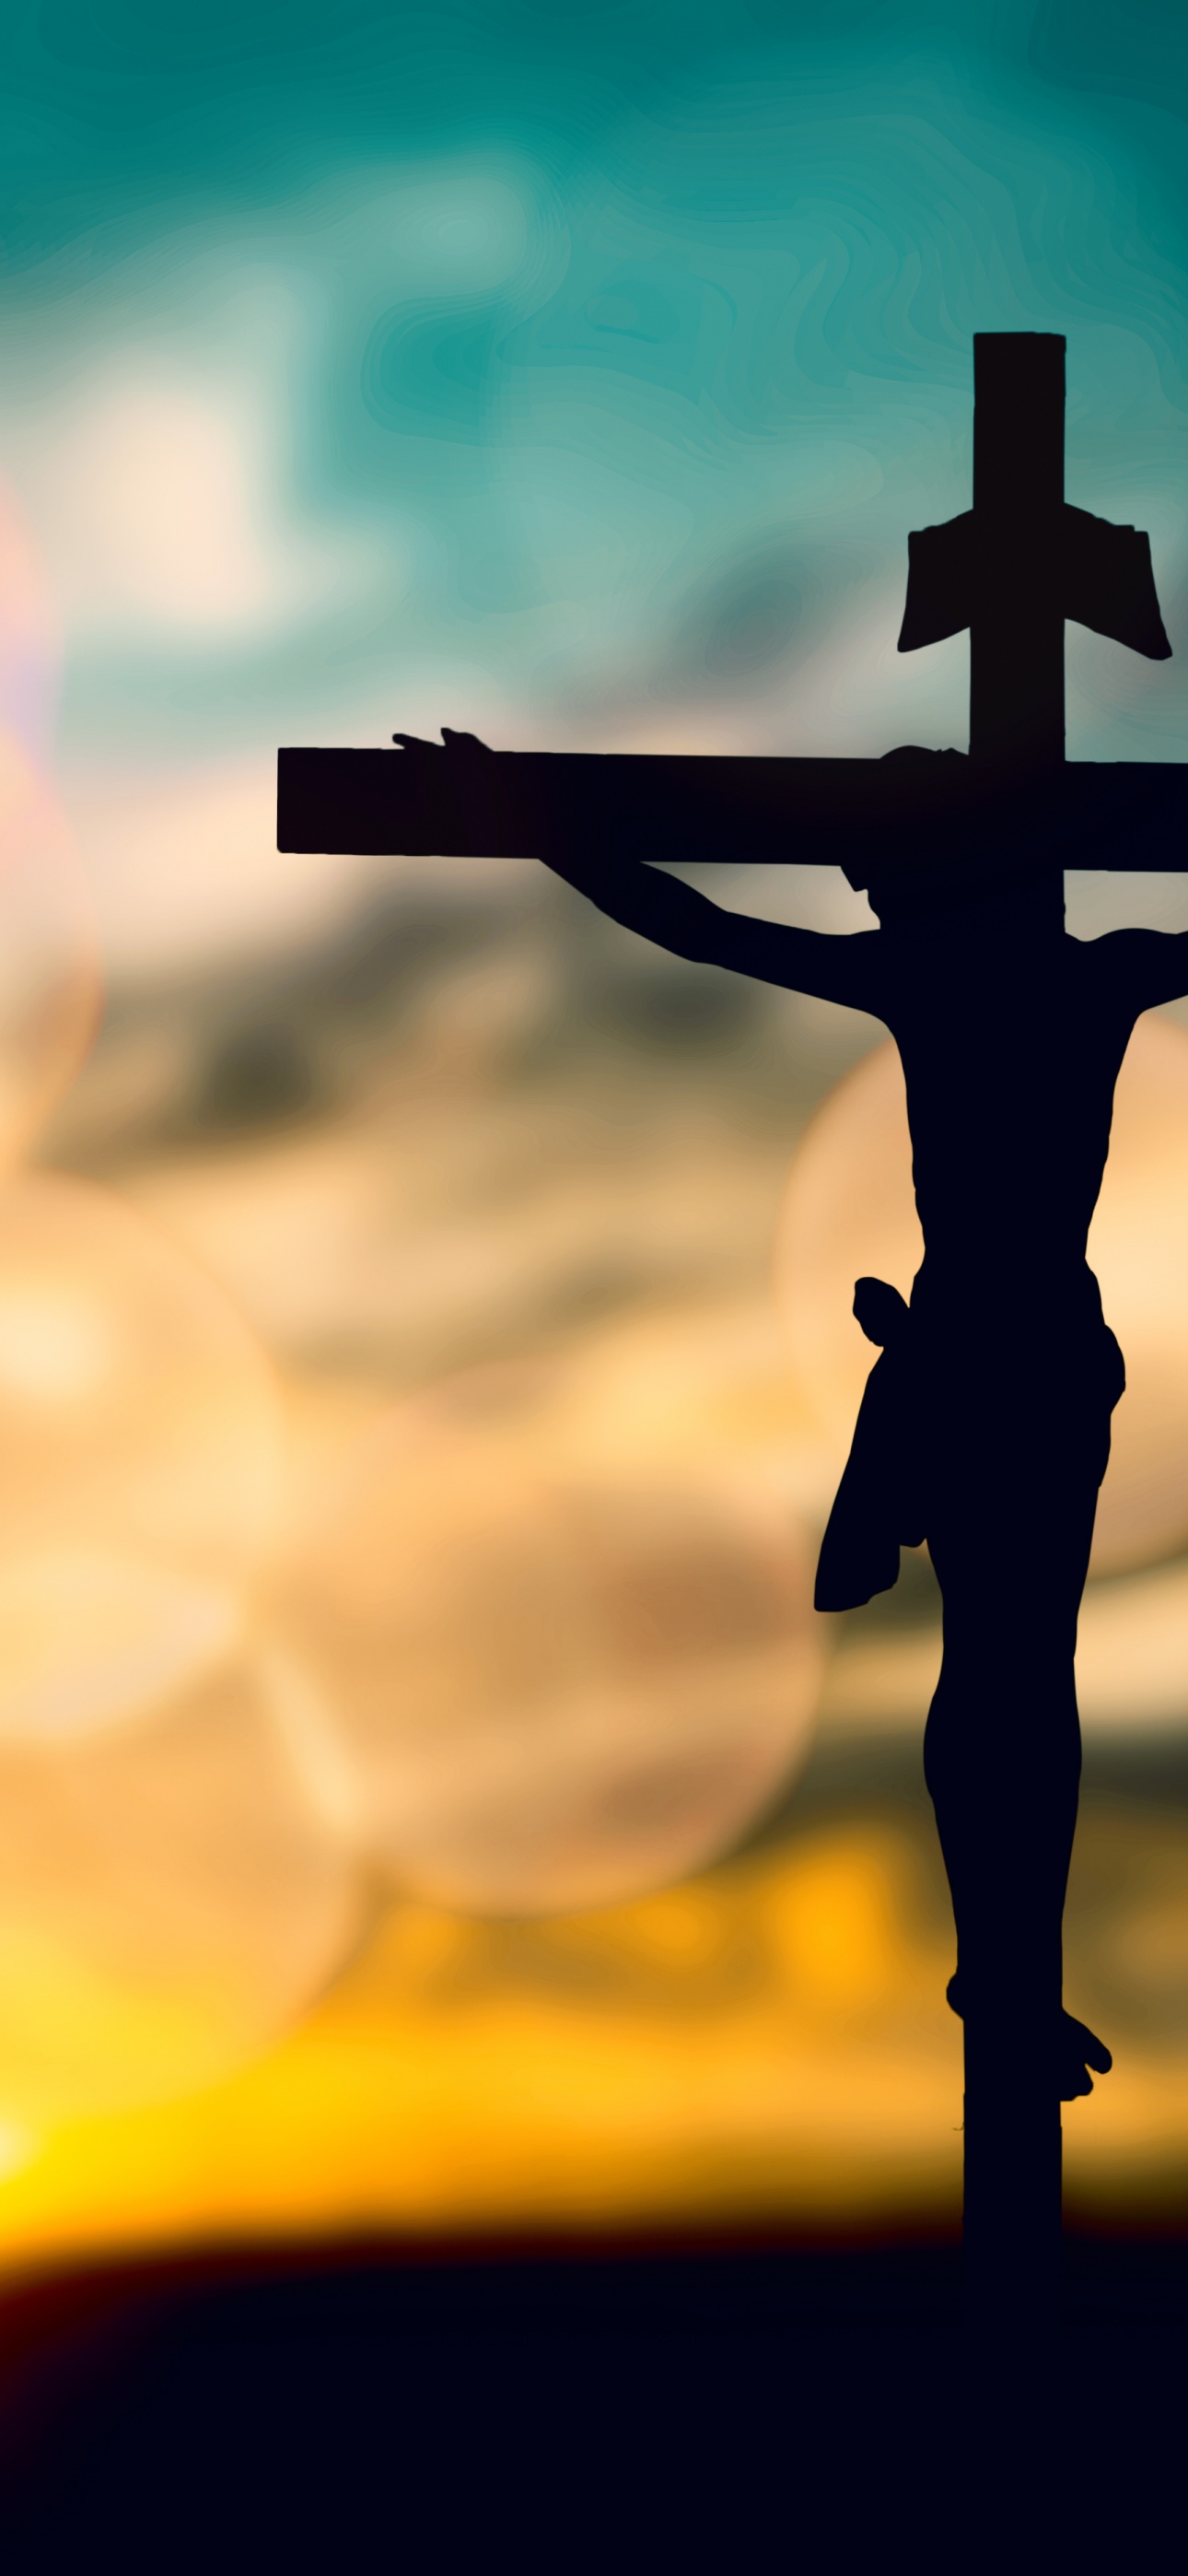 jesus christ» 1080P, 2k, 4k HD wallpapers, backgrounds free download | Rare  Gallery